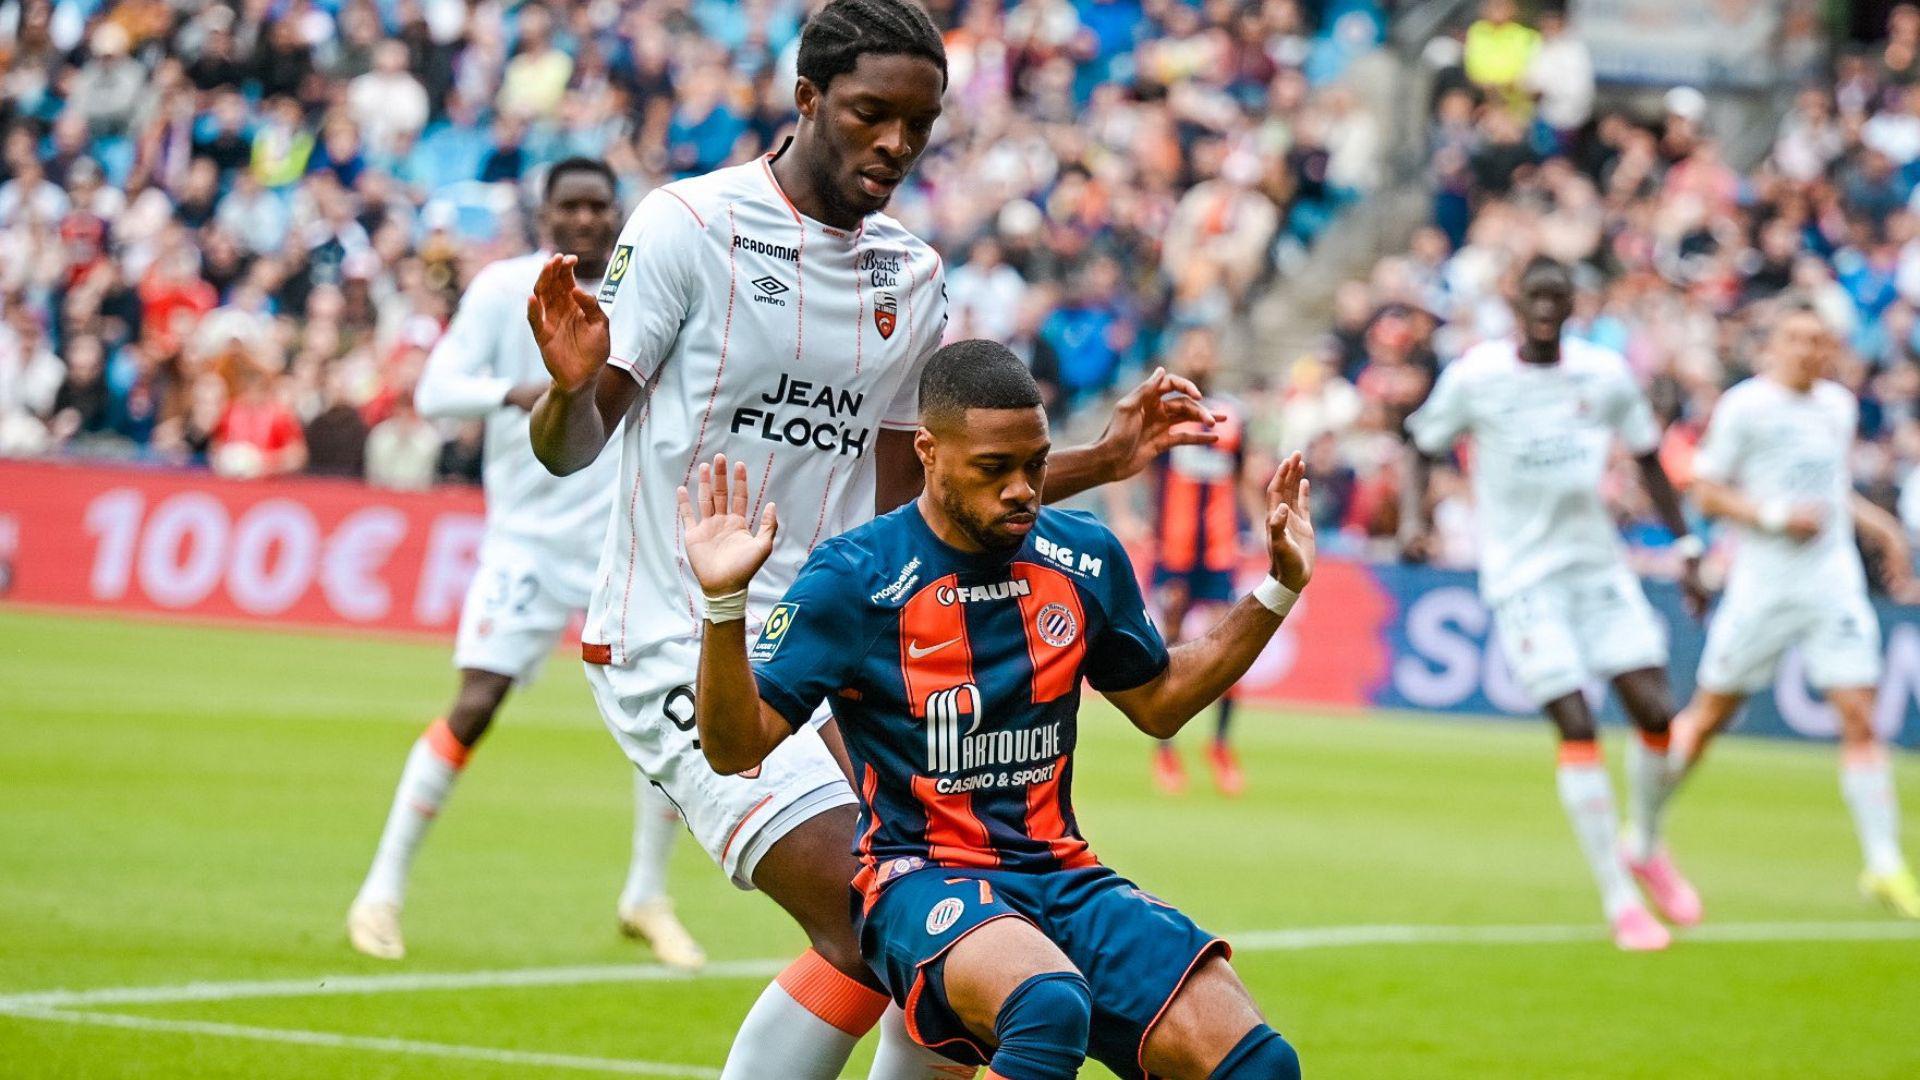 VIDEO | Ligue 1 Highlights: Montpellier vs Lorient